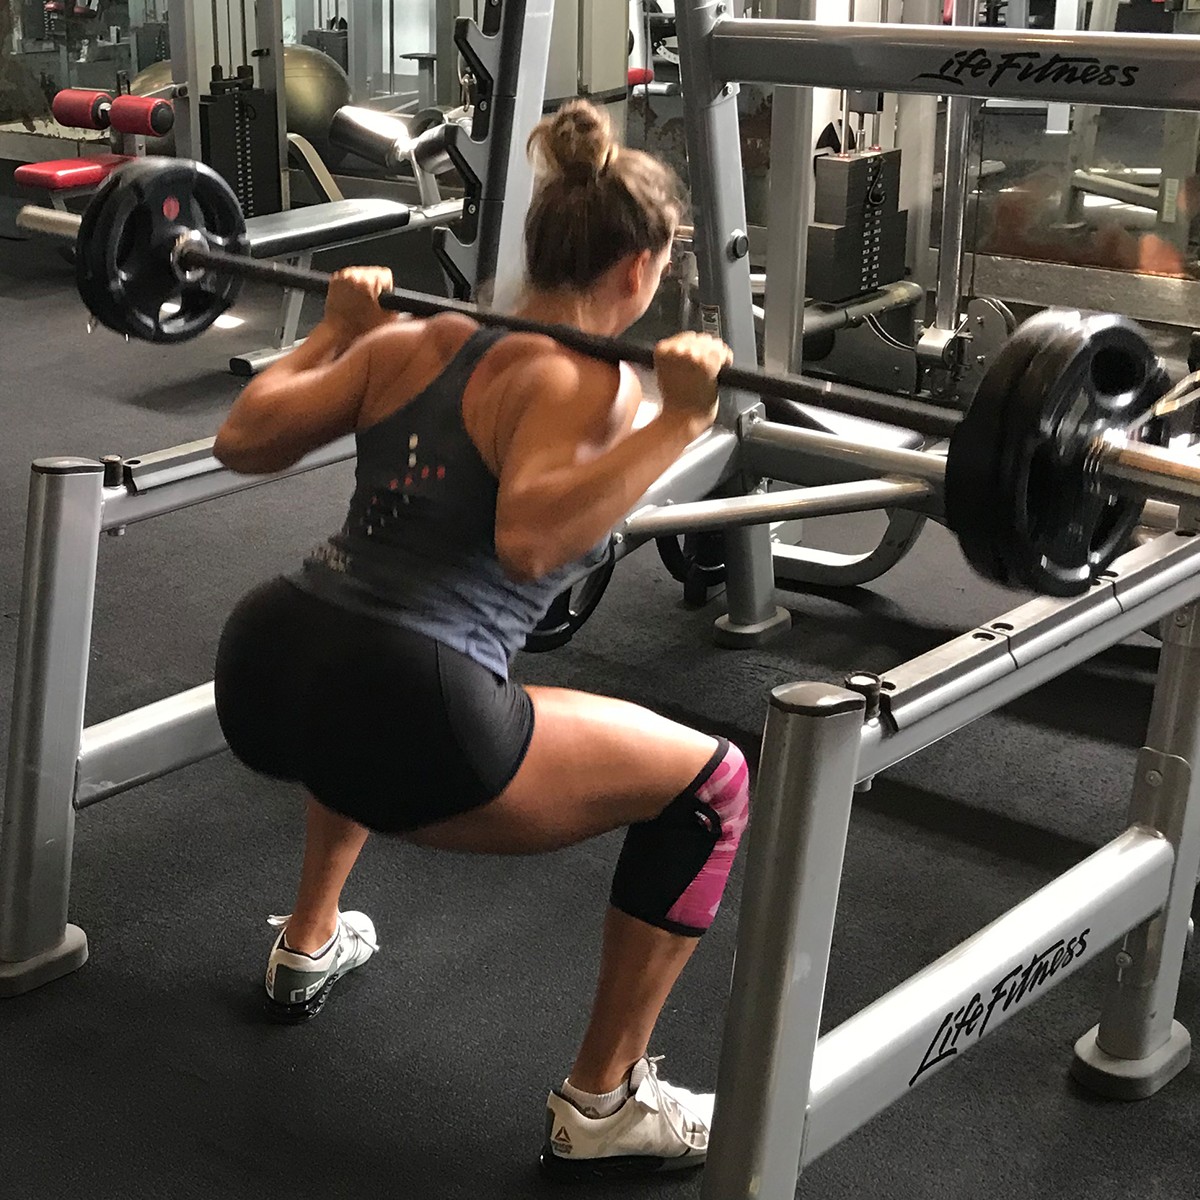 Squats: better for booty growth than hip thrusts.